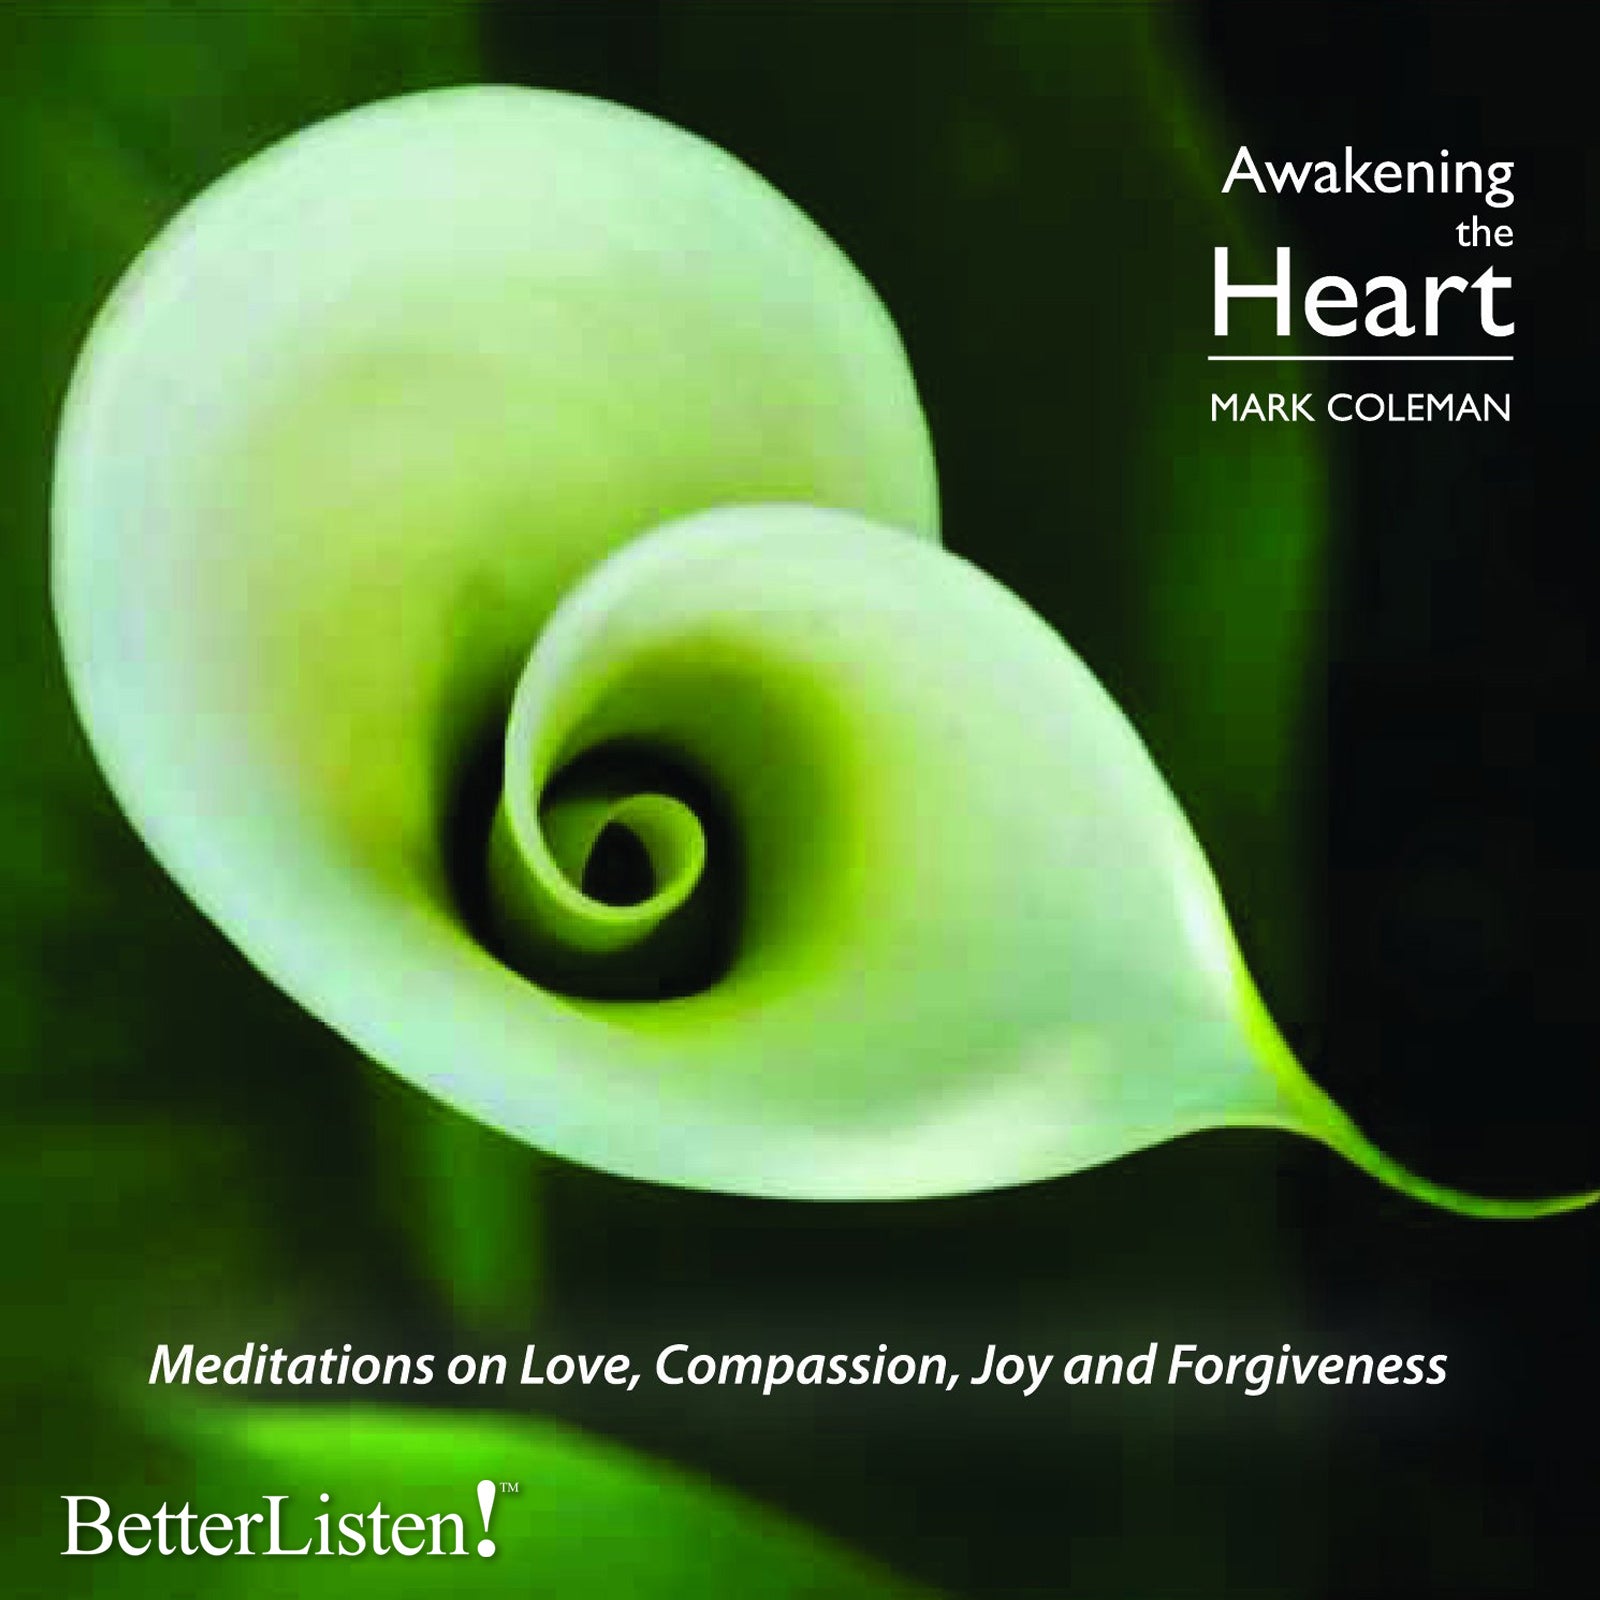 Awakening The Heart: Meditations on Love, Compassion, Joy and Forgiveness with Mark Coleman